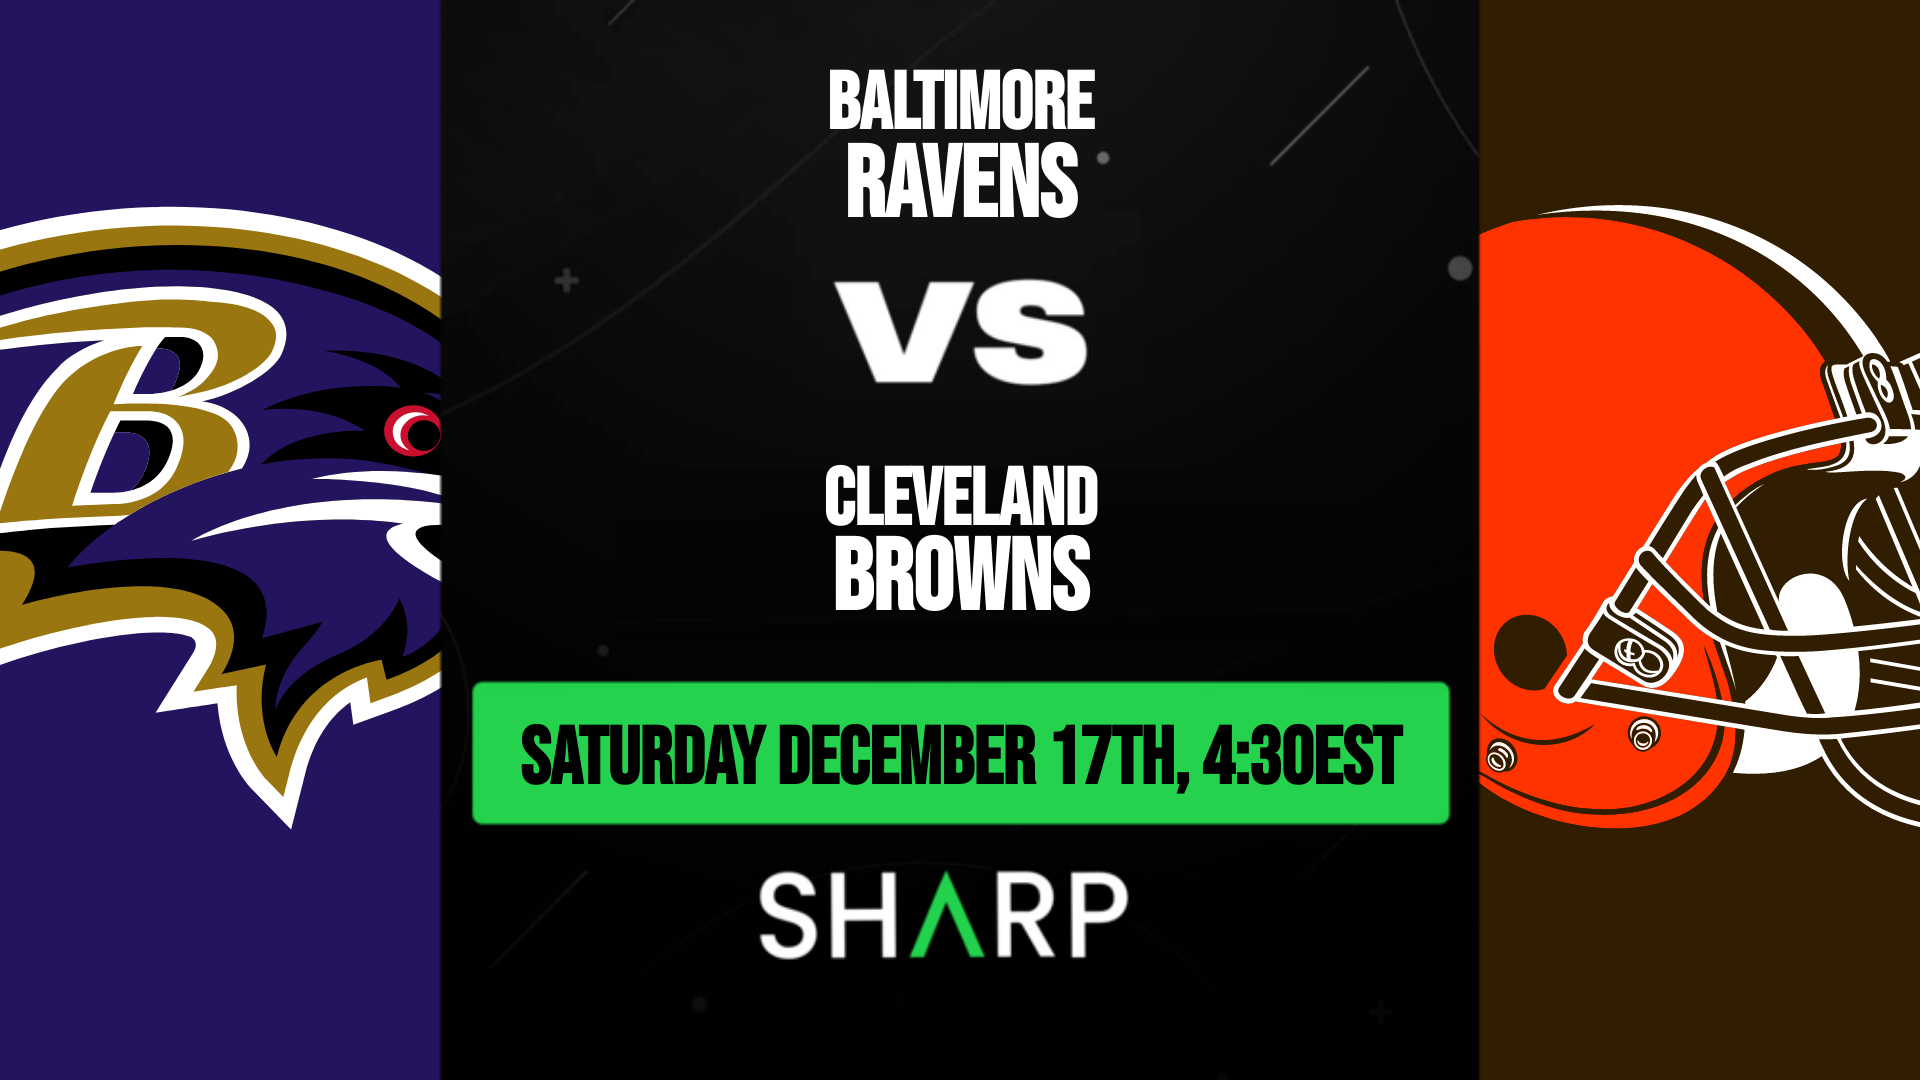 Baltimore Ravens vs Cleveland Browns Matchup Preview - December 17th, 2022